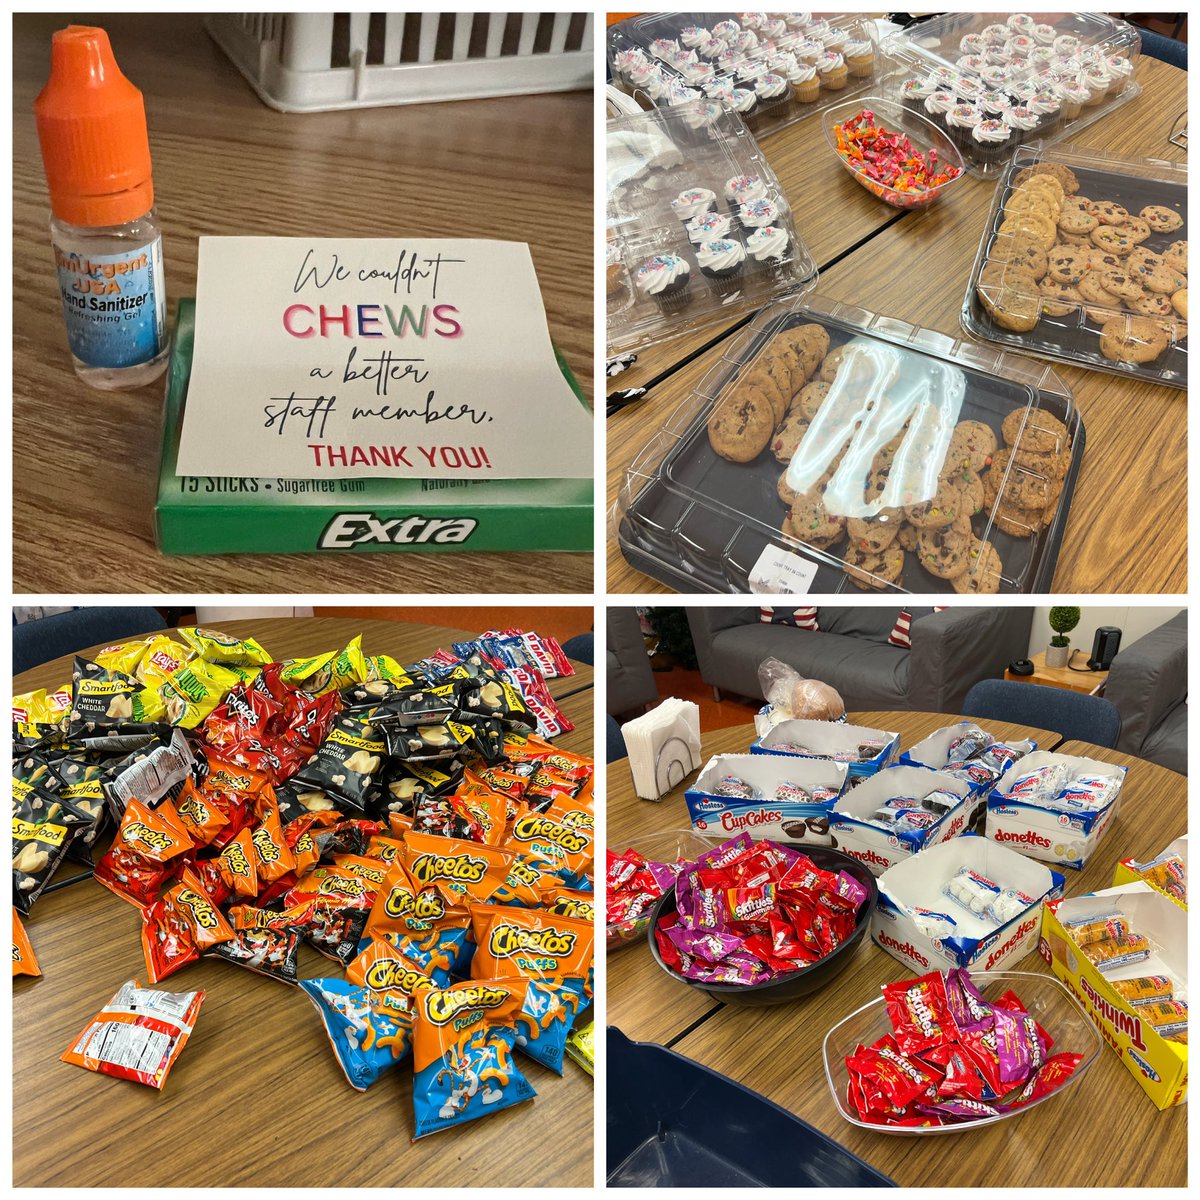 Teacher appreciation day 2: we couldn’t chews a better staff than the one we have! Our PTSA provided staff with an awesome snack bar in the faculty lounge & Ms Chandler gifted staff gum & hand sanitizer as an extra thank you! ❤️🤍💙#belonggrowsucceed #aacpsawesome #patriotpride